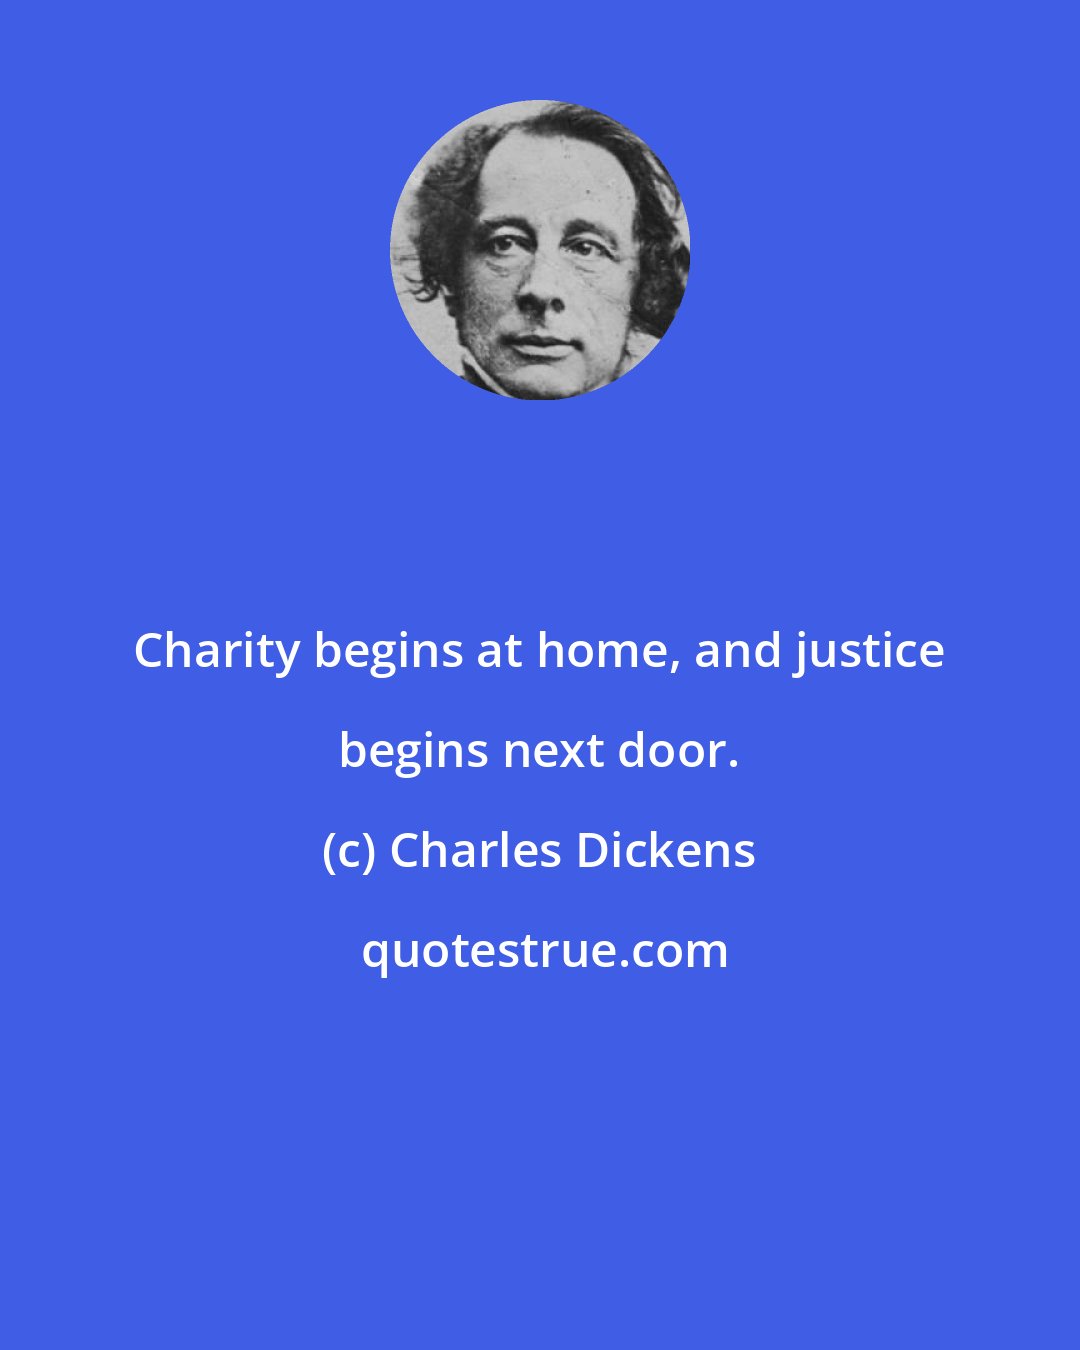 Charles Dickens: Charity begins at home, and justice begins next door.